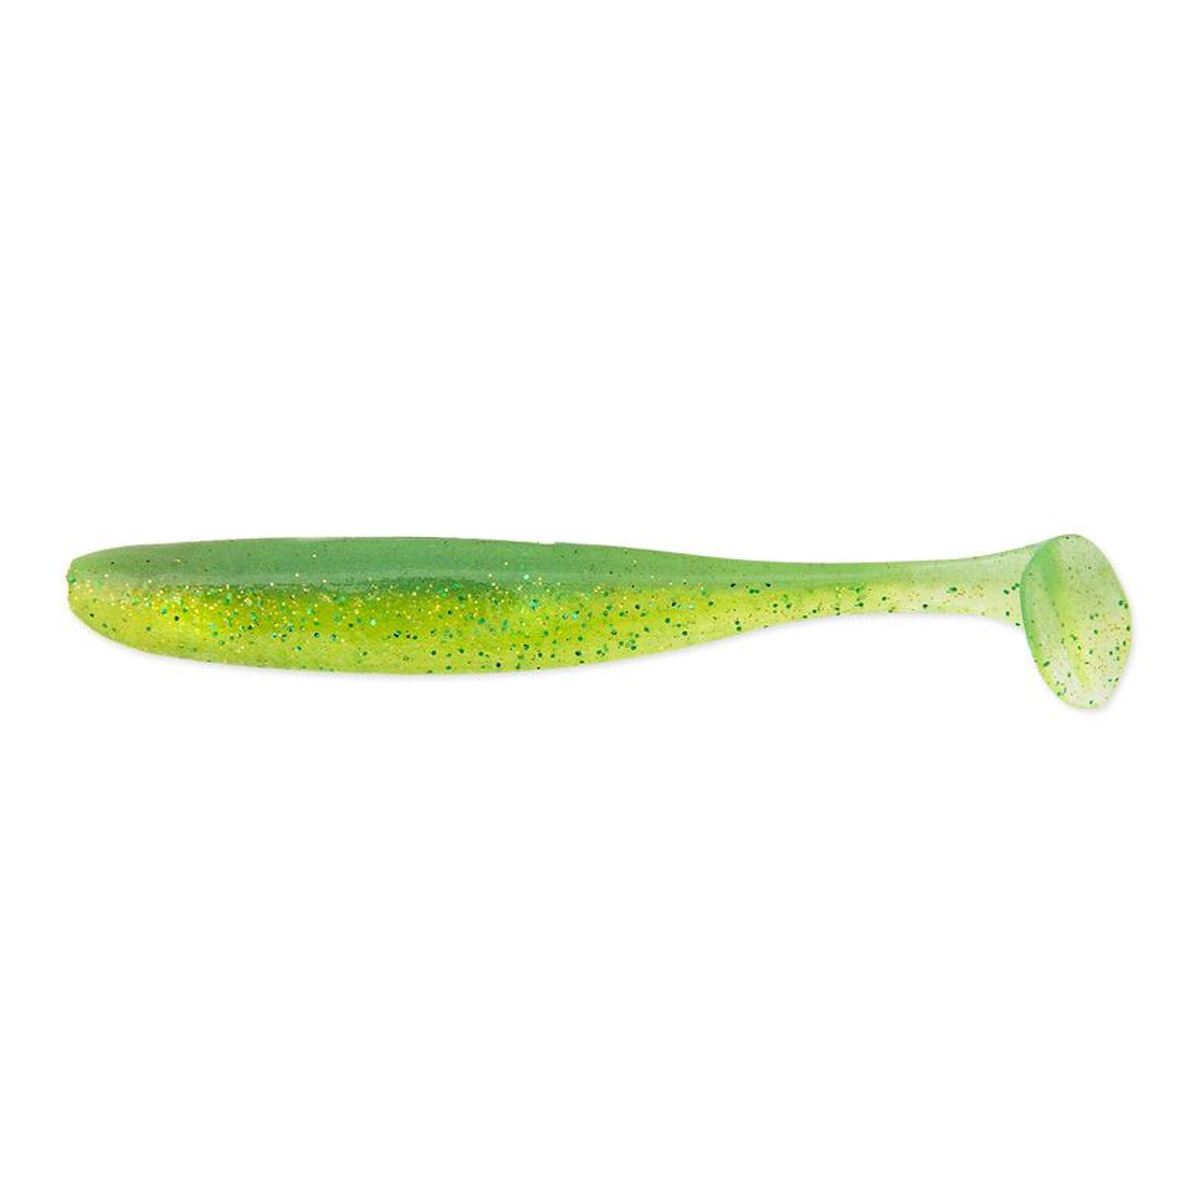 Keitech Easy Shiner 5 inch -  Lime Chartreuse.